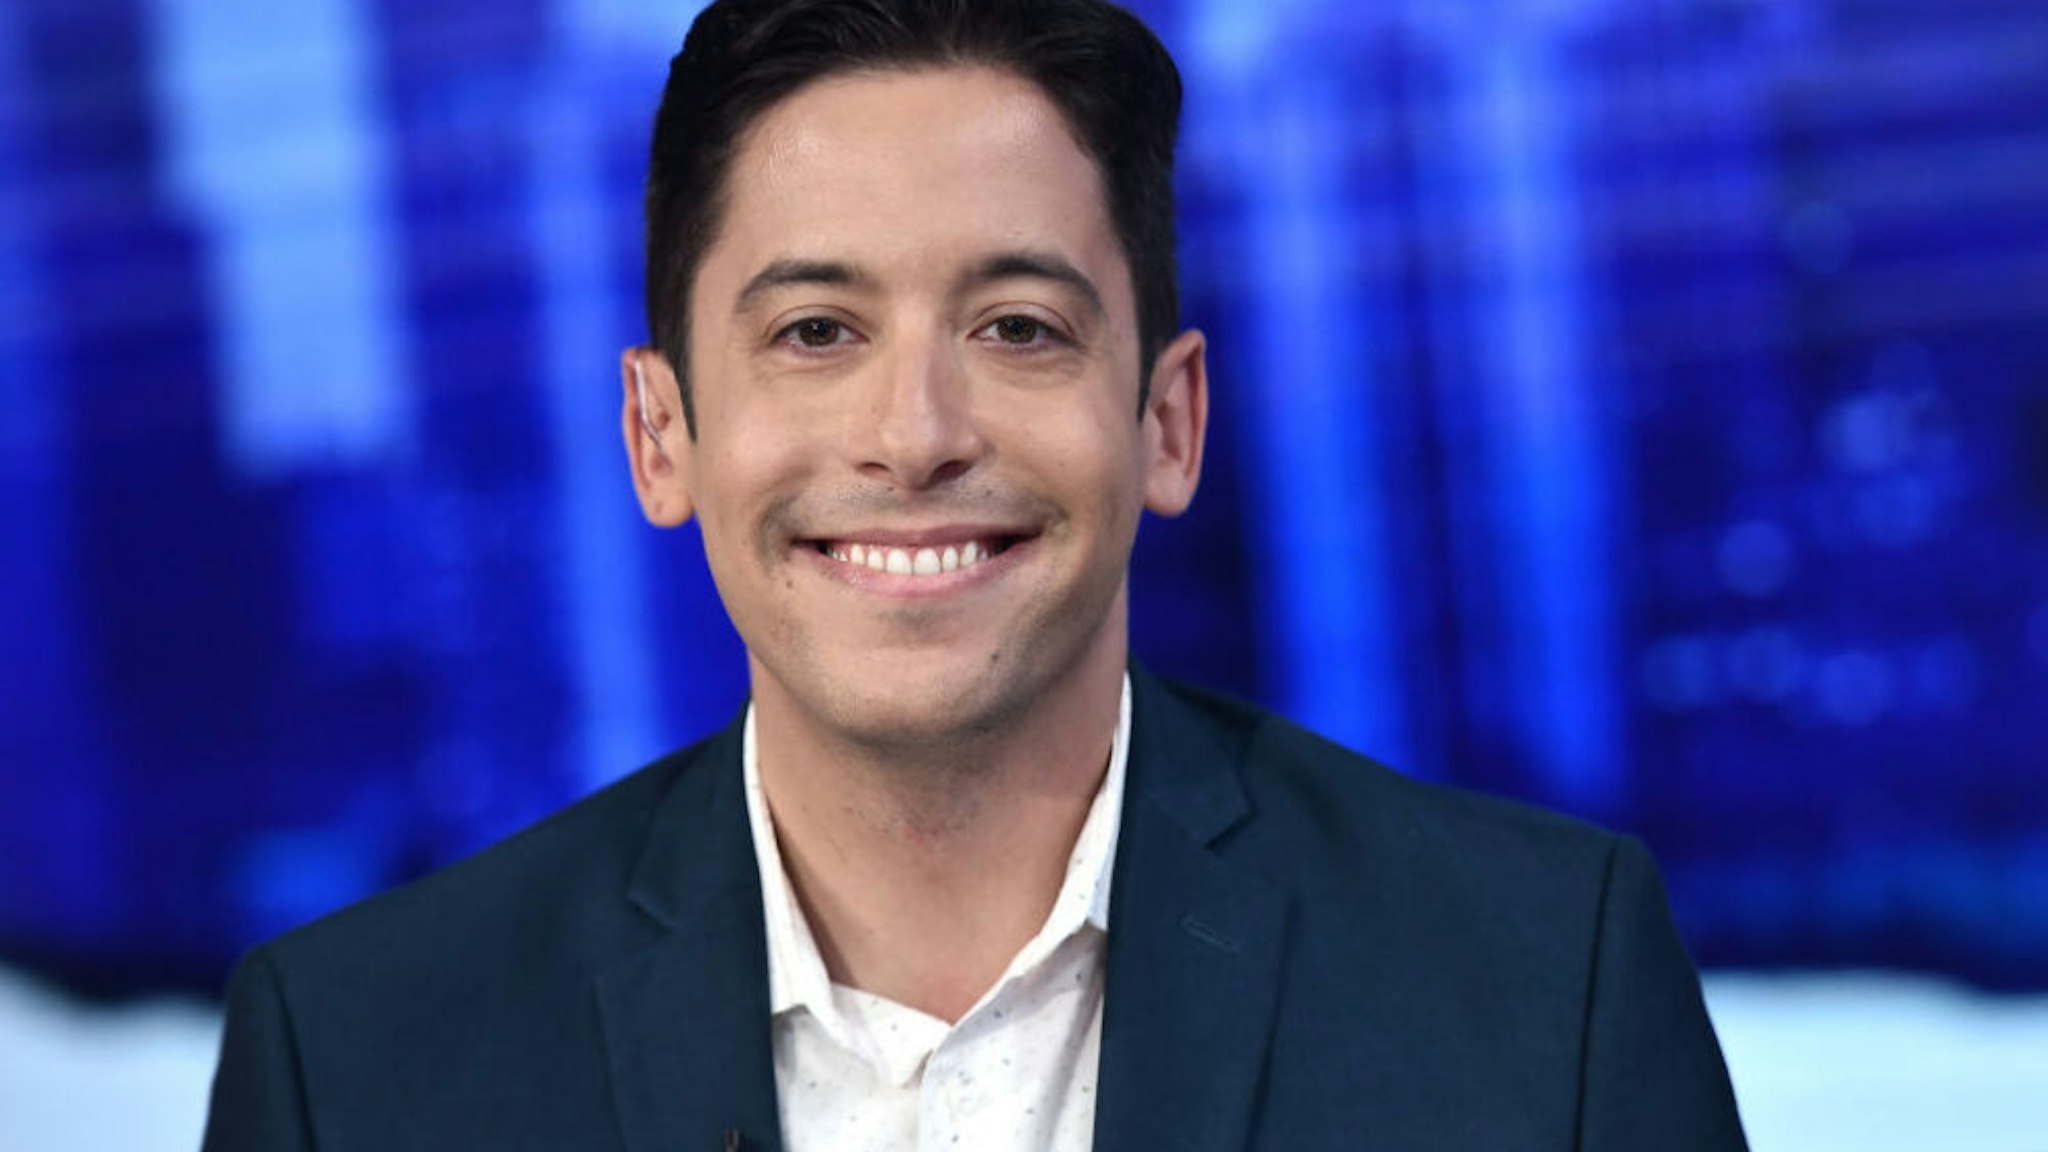 NEW YORK, NEW YORK - SEPTEMBER 17: (EXCLUSIVE COVERAGE) Michael Knowles visits "The Story with Martha MacCallum" in the Fox News Channel Studios on September 17, 2019 in New York City.